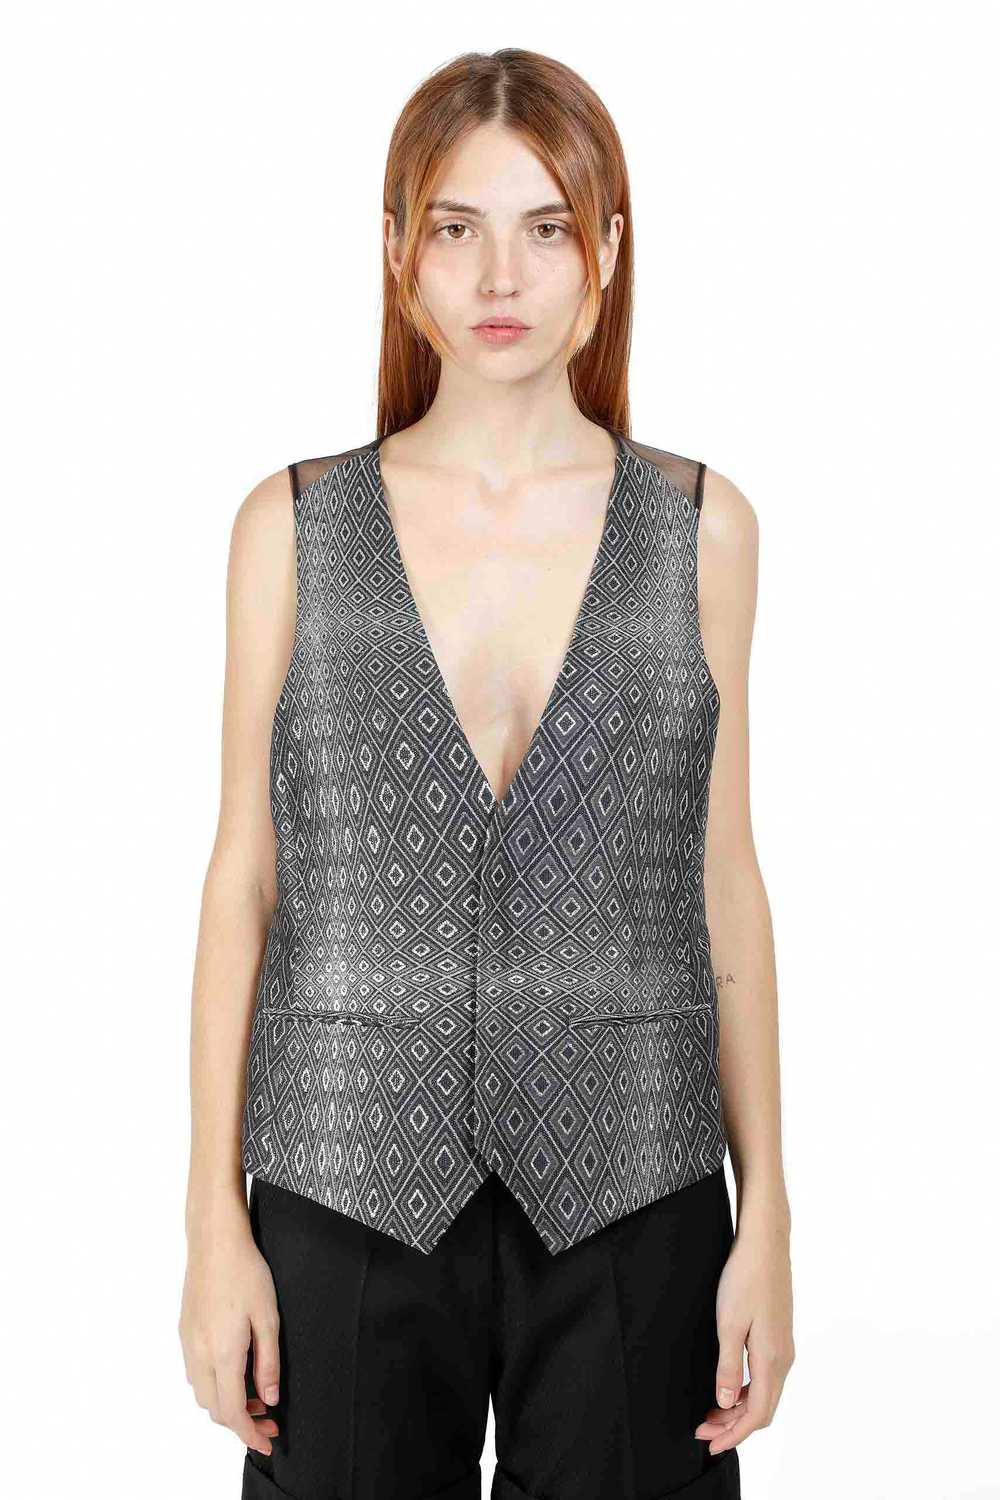 UNDERCOVER Psychedelic-jacquard waistcoat S/S 2009 - image 1